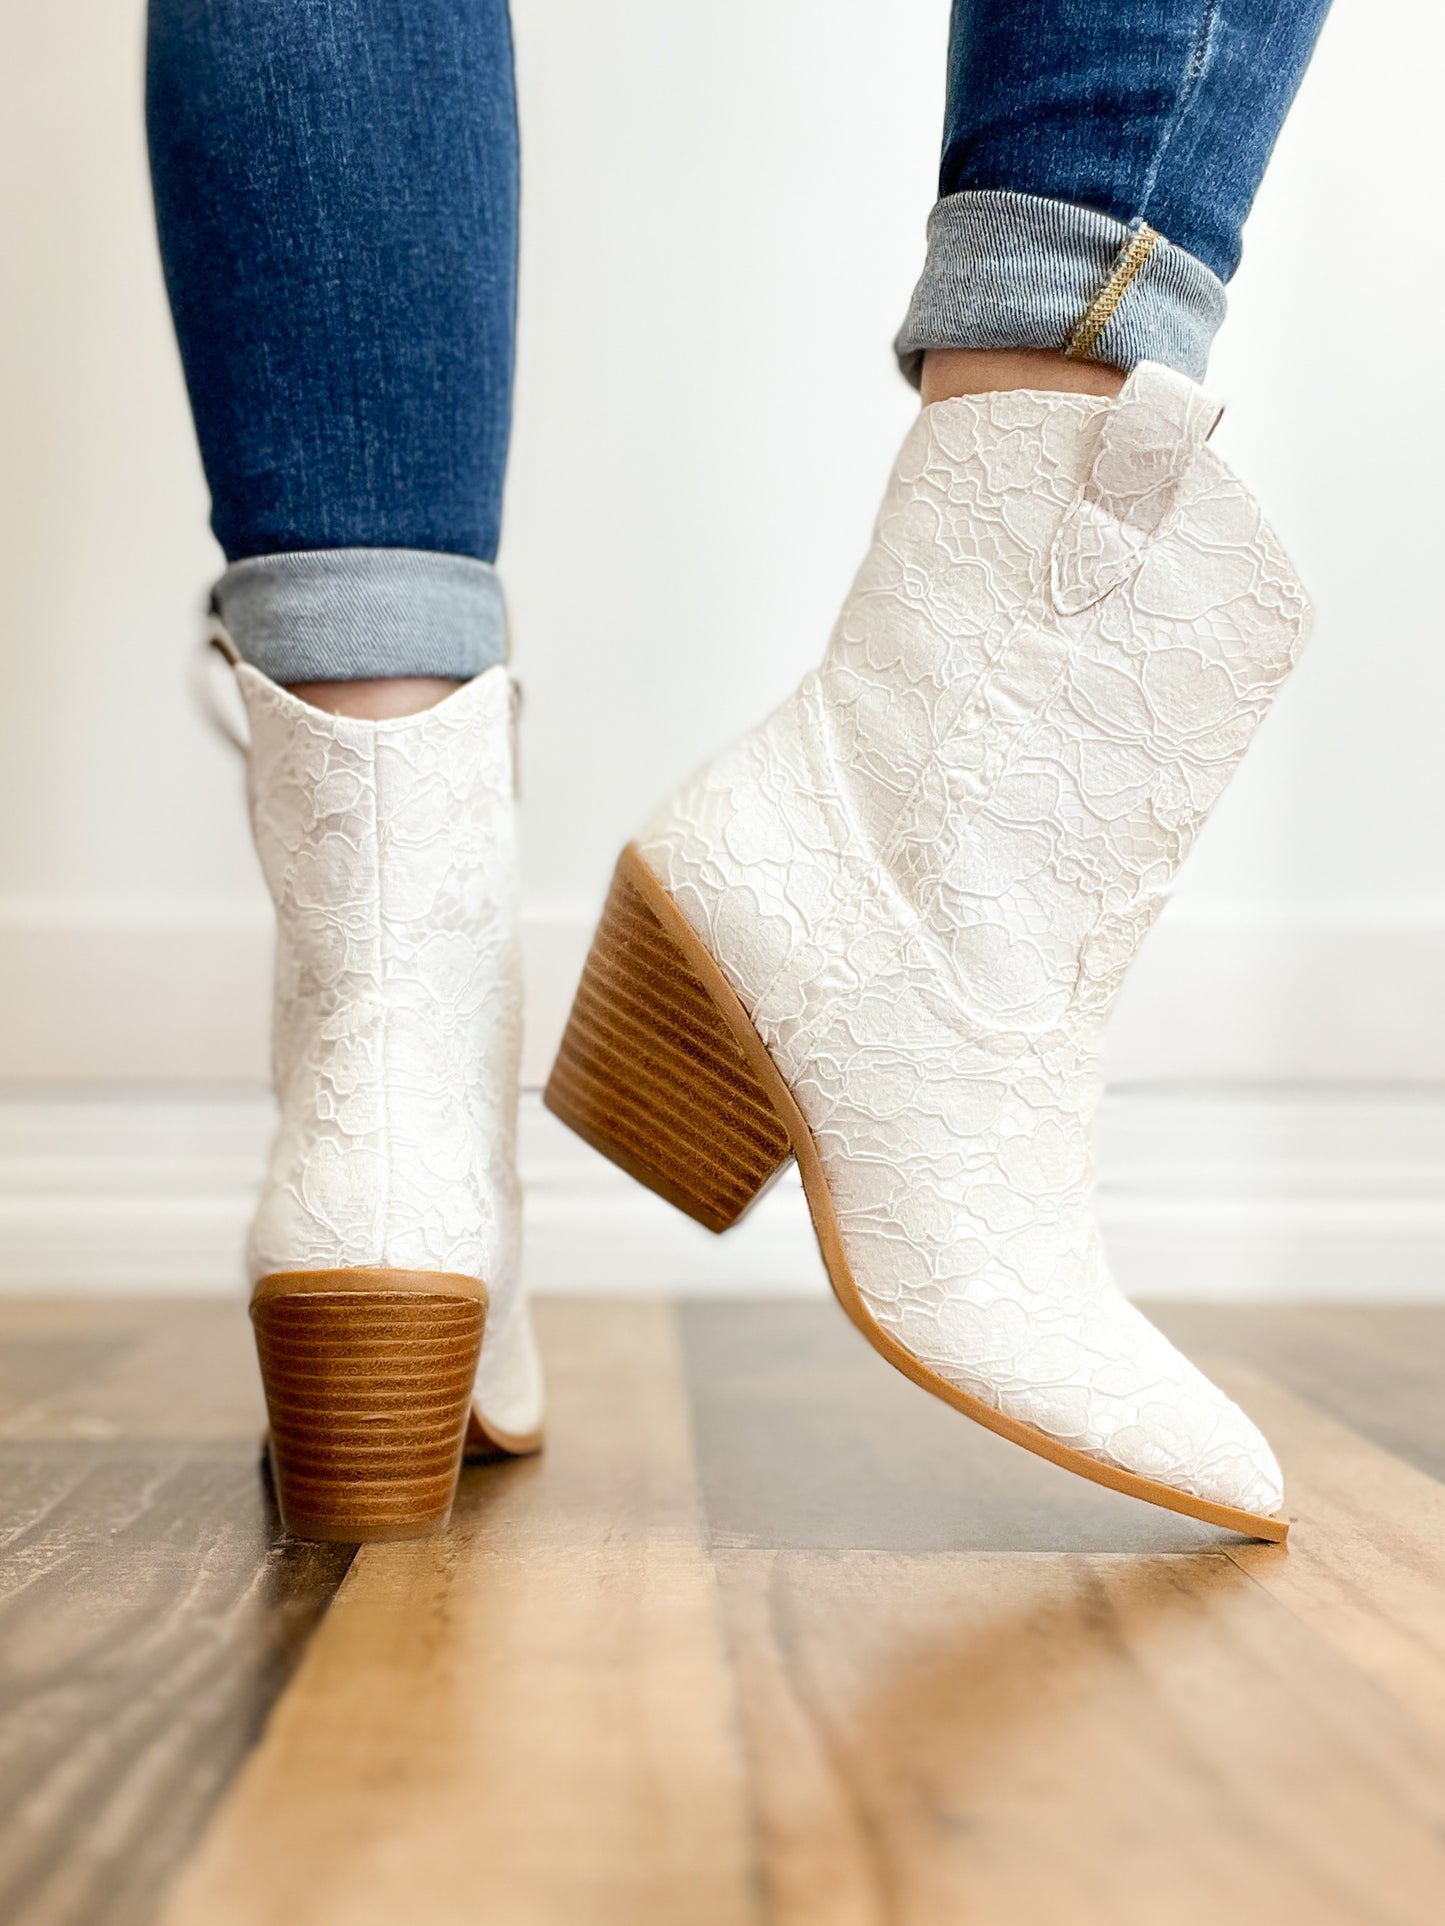 Corkys Rowdy Booties in White Lace